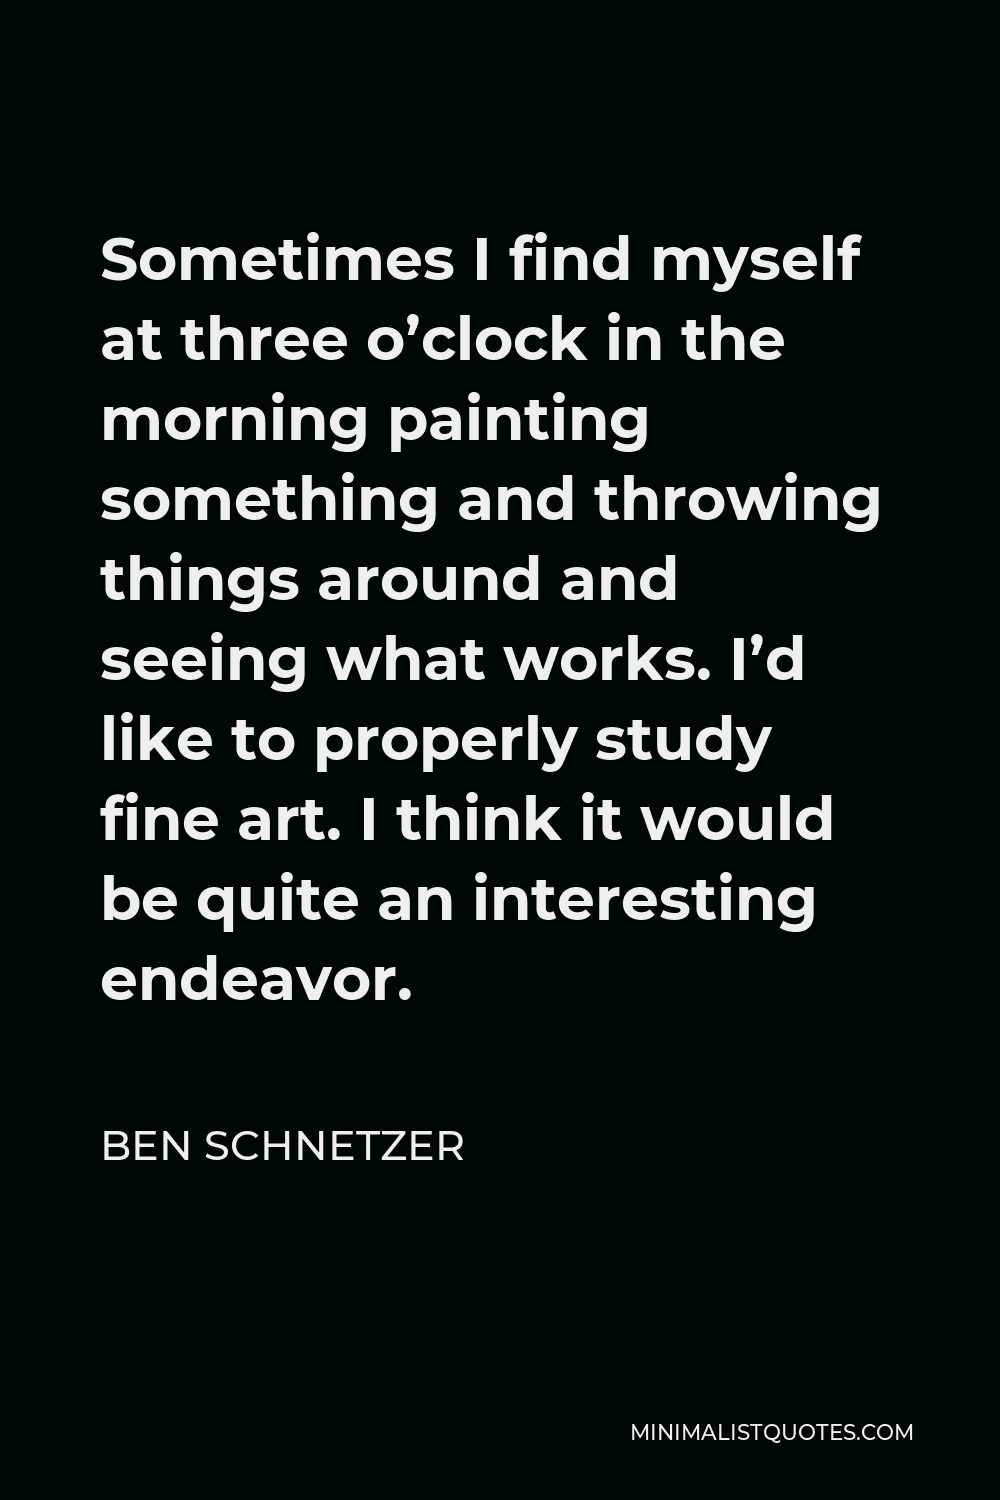 Ben Schnetzer Quote - Sometimes I find myself at three o’clock in the morning painting something and throwing things around and seeing what works. I’d like to properly study fine art. I think it would be quite an interesting endeavor.